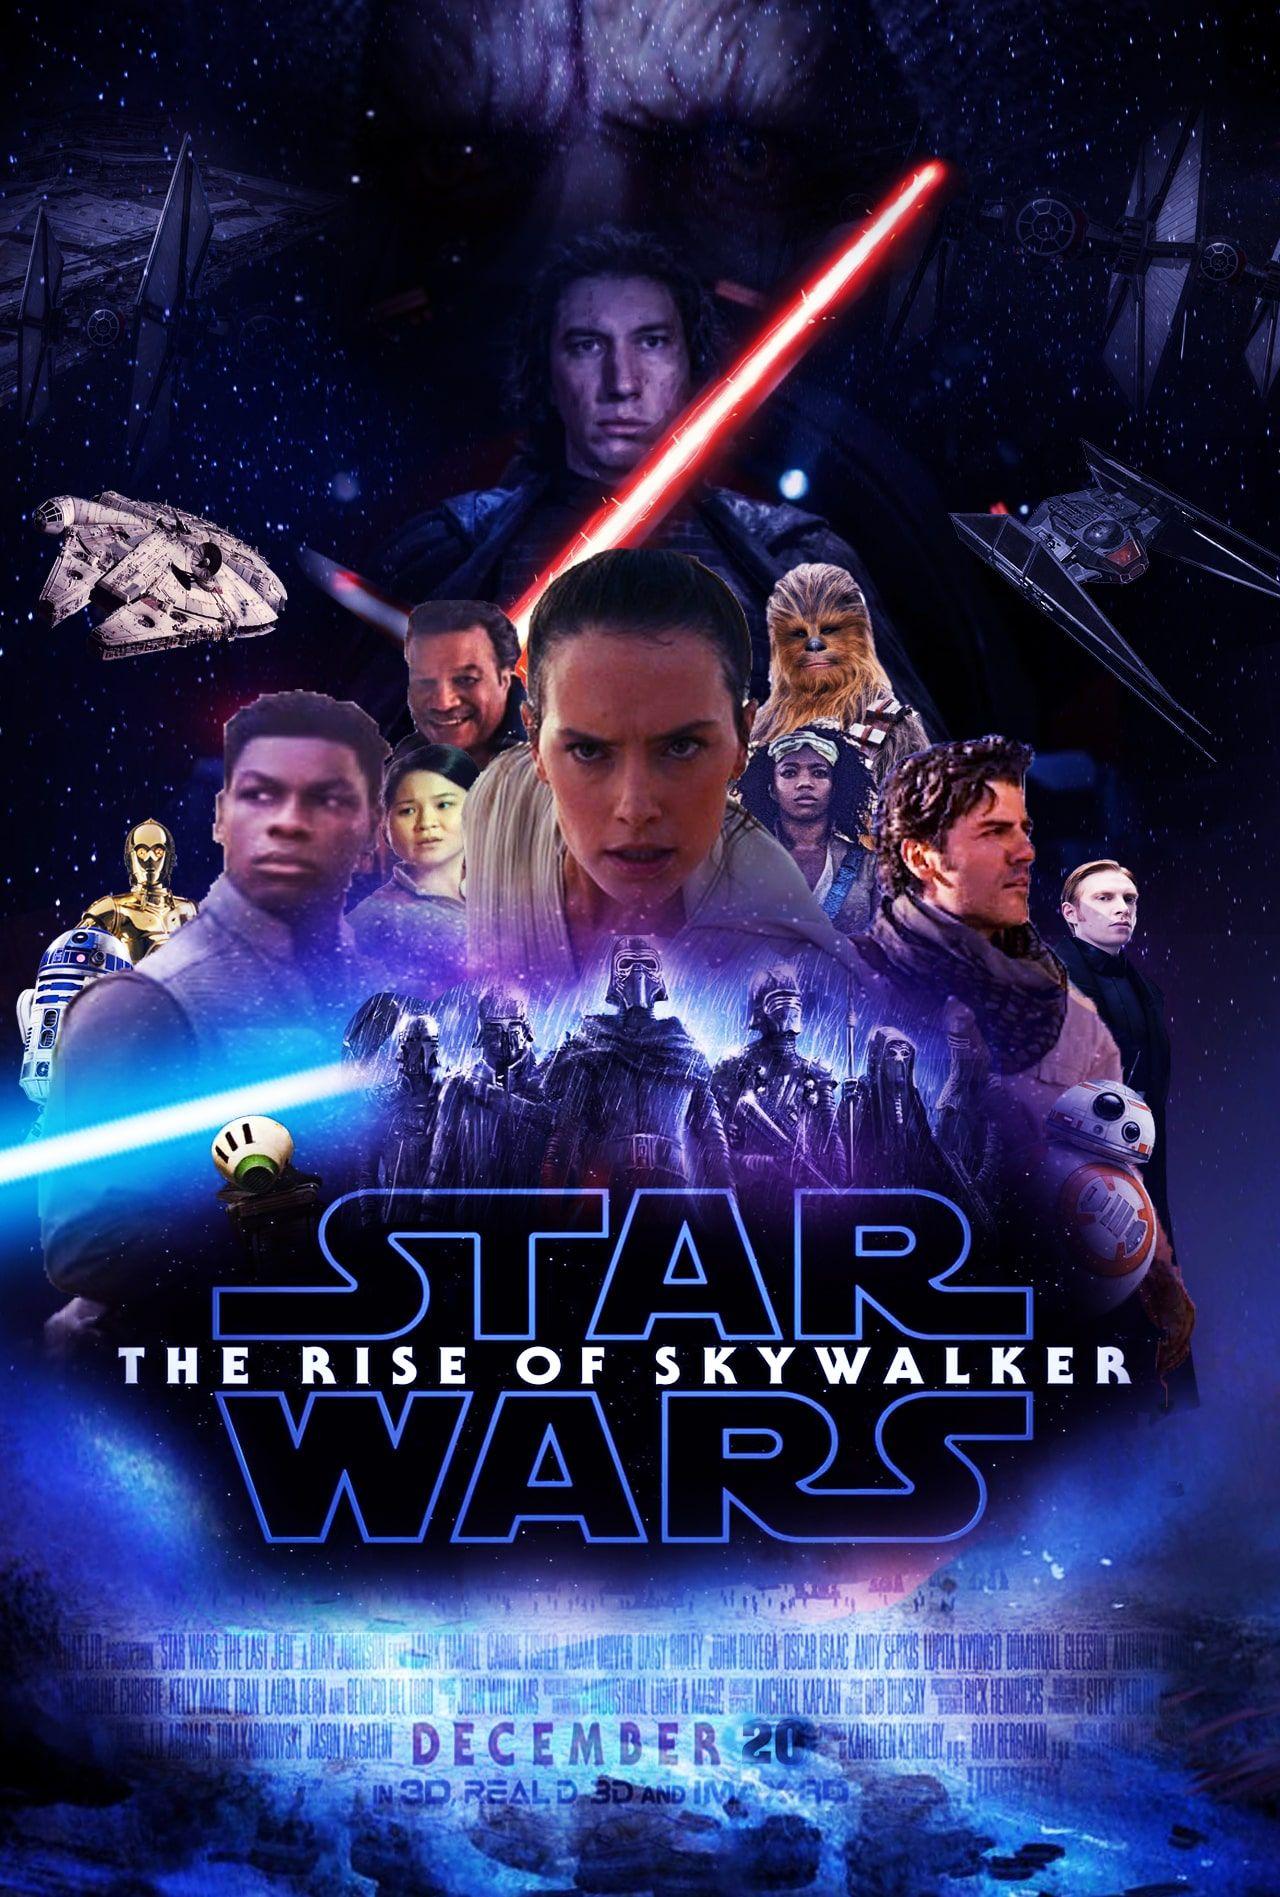 Star Wars: The Rise of Skywalker download the new